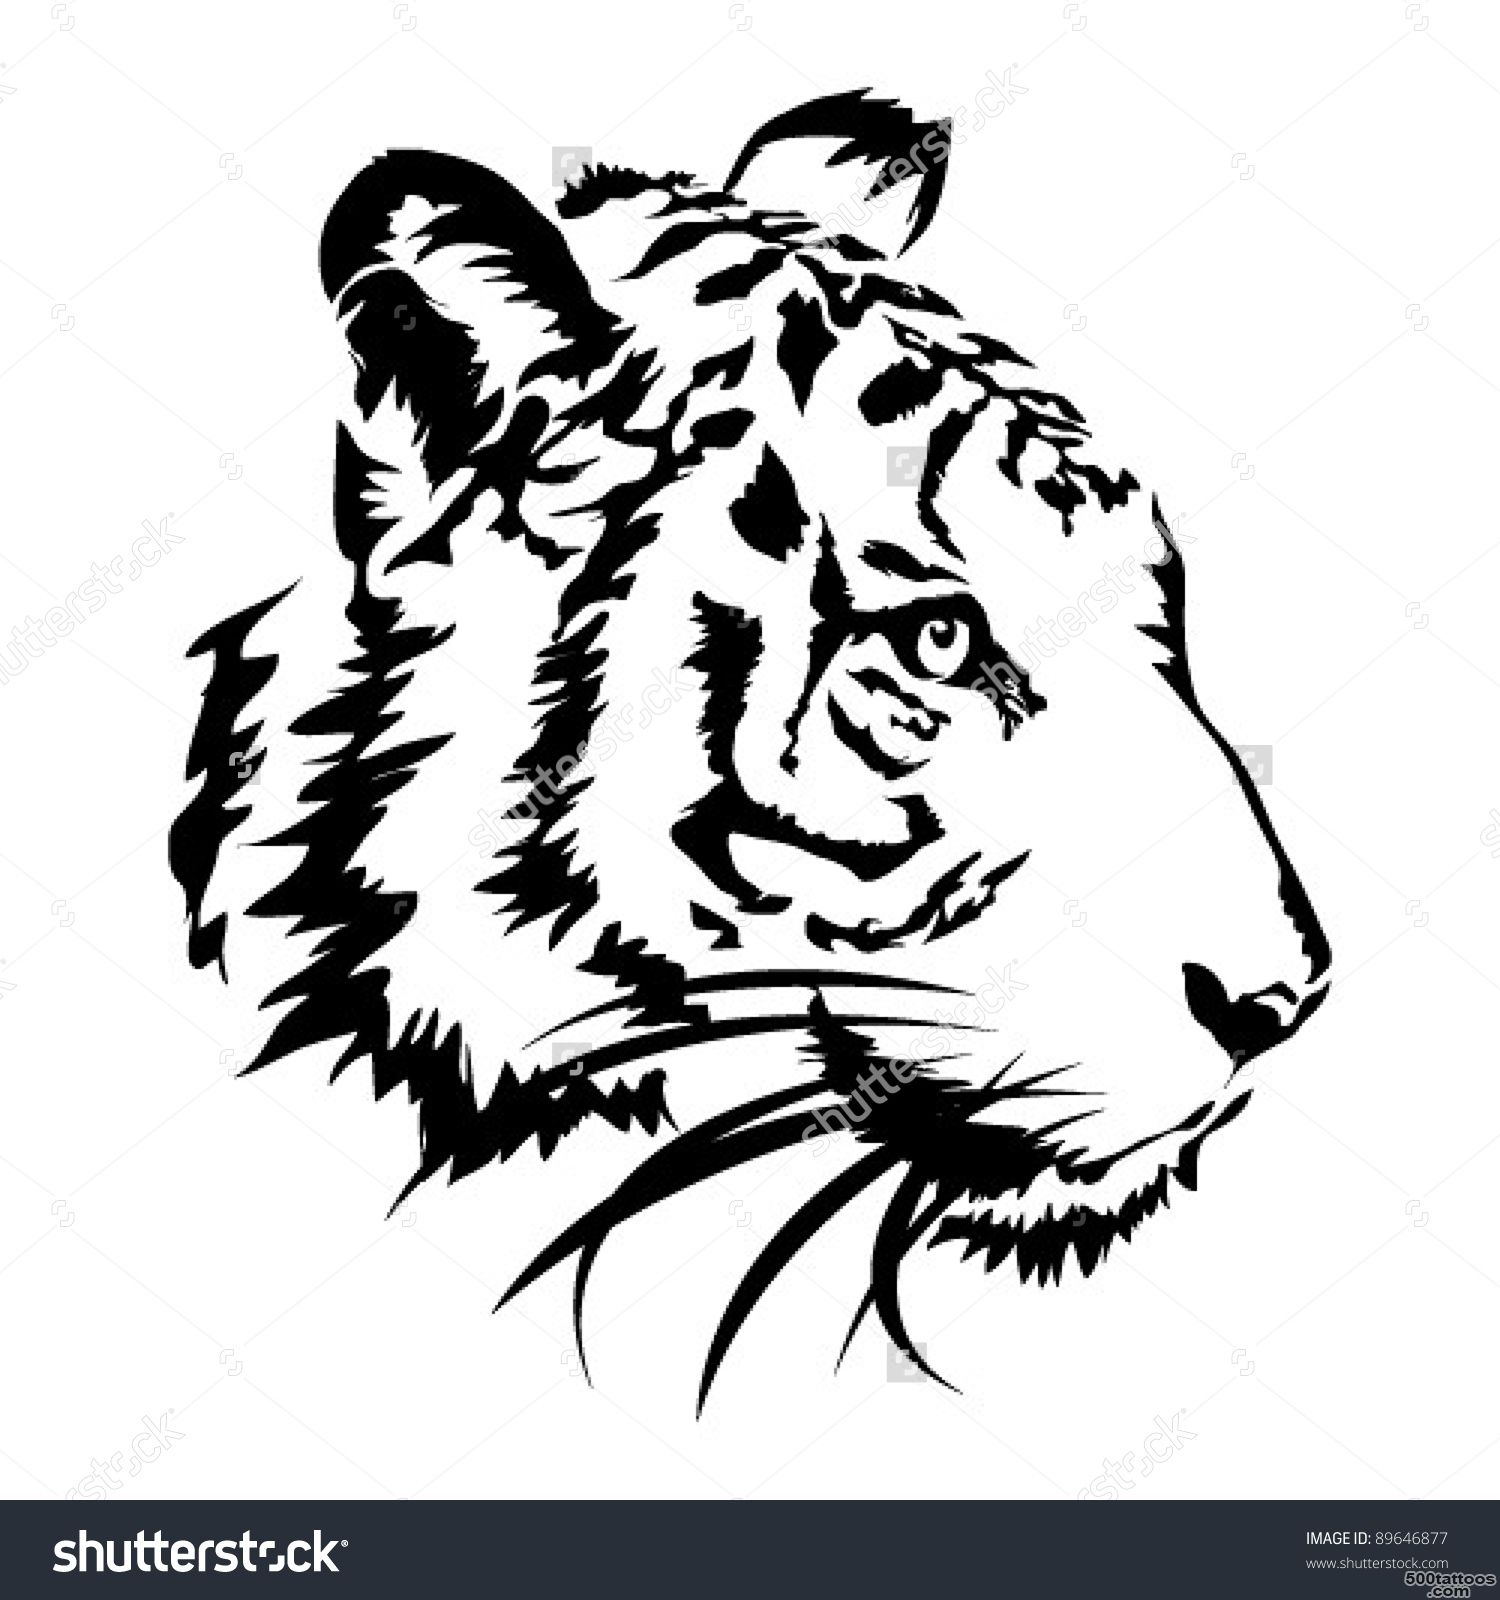 Tiger Tattoo Stock Photos, Images, amp Pictures  Shutterstock_28